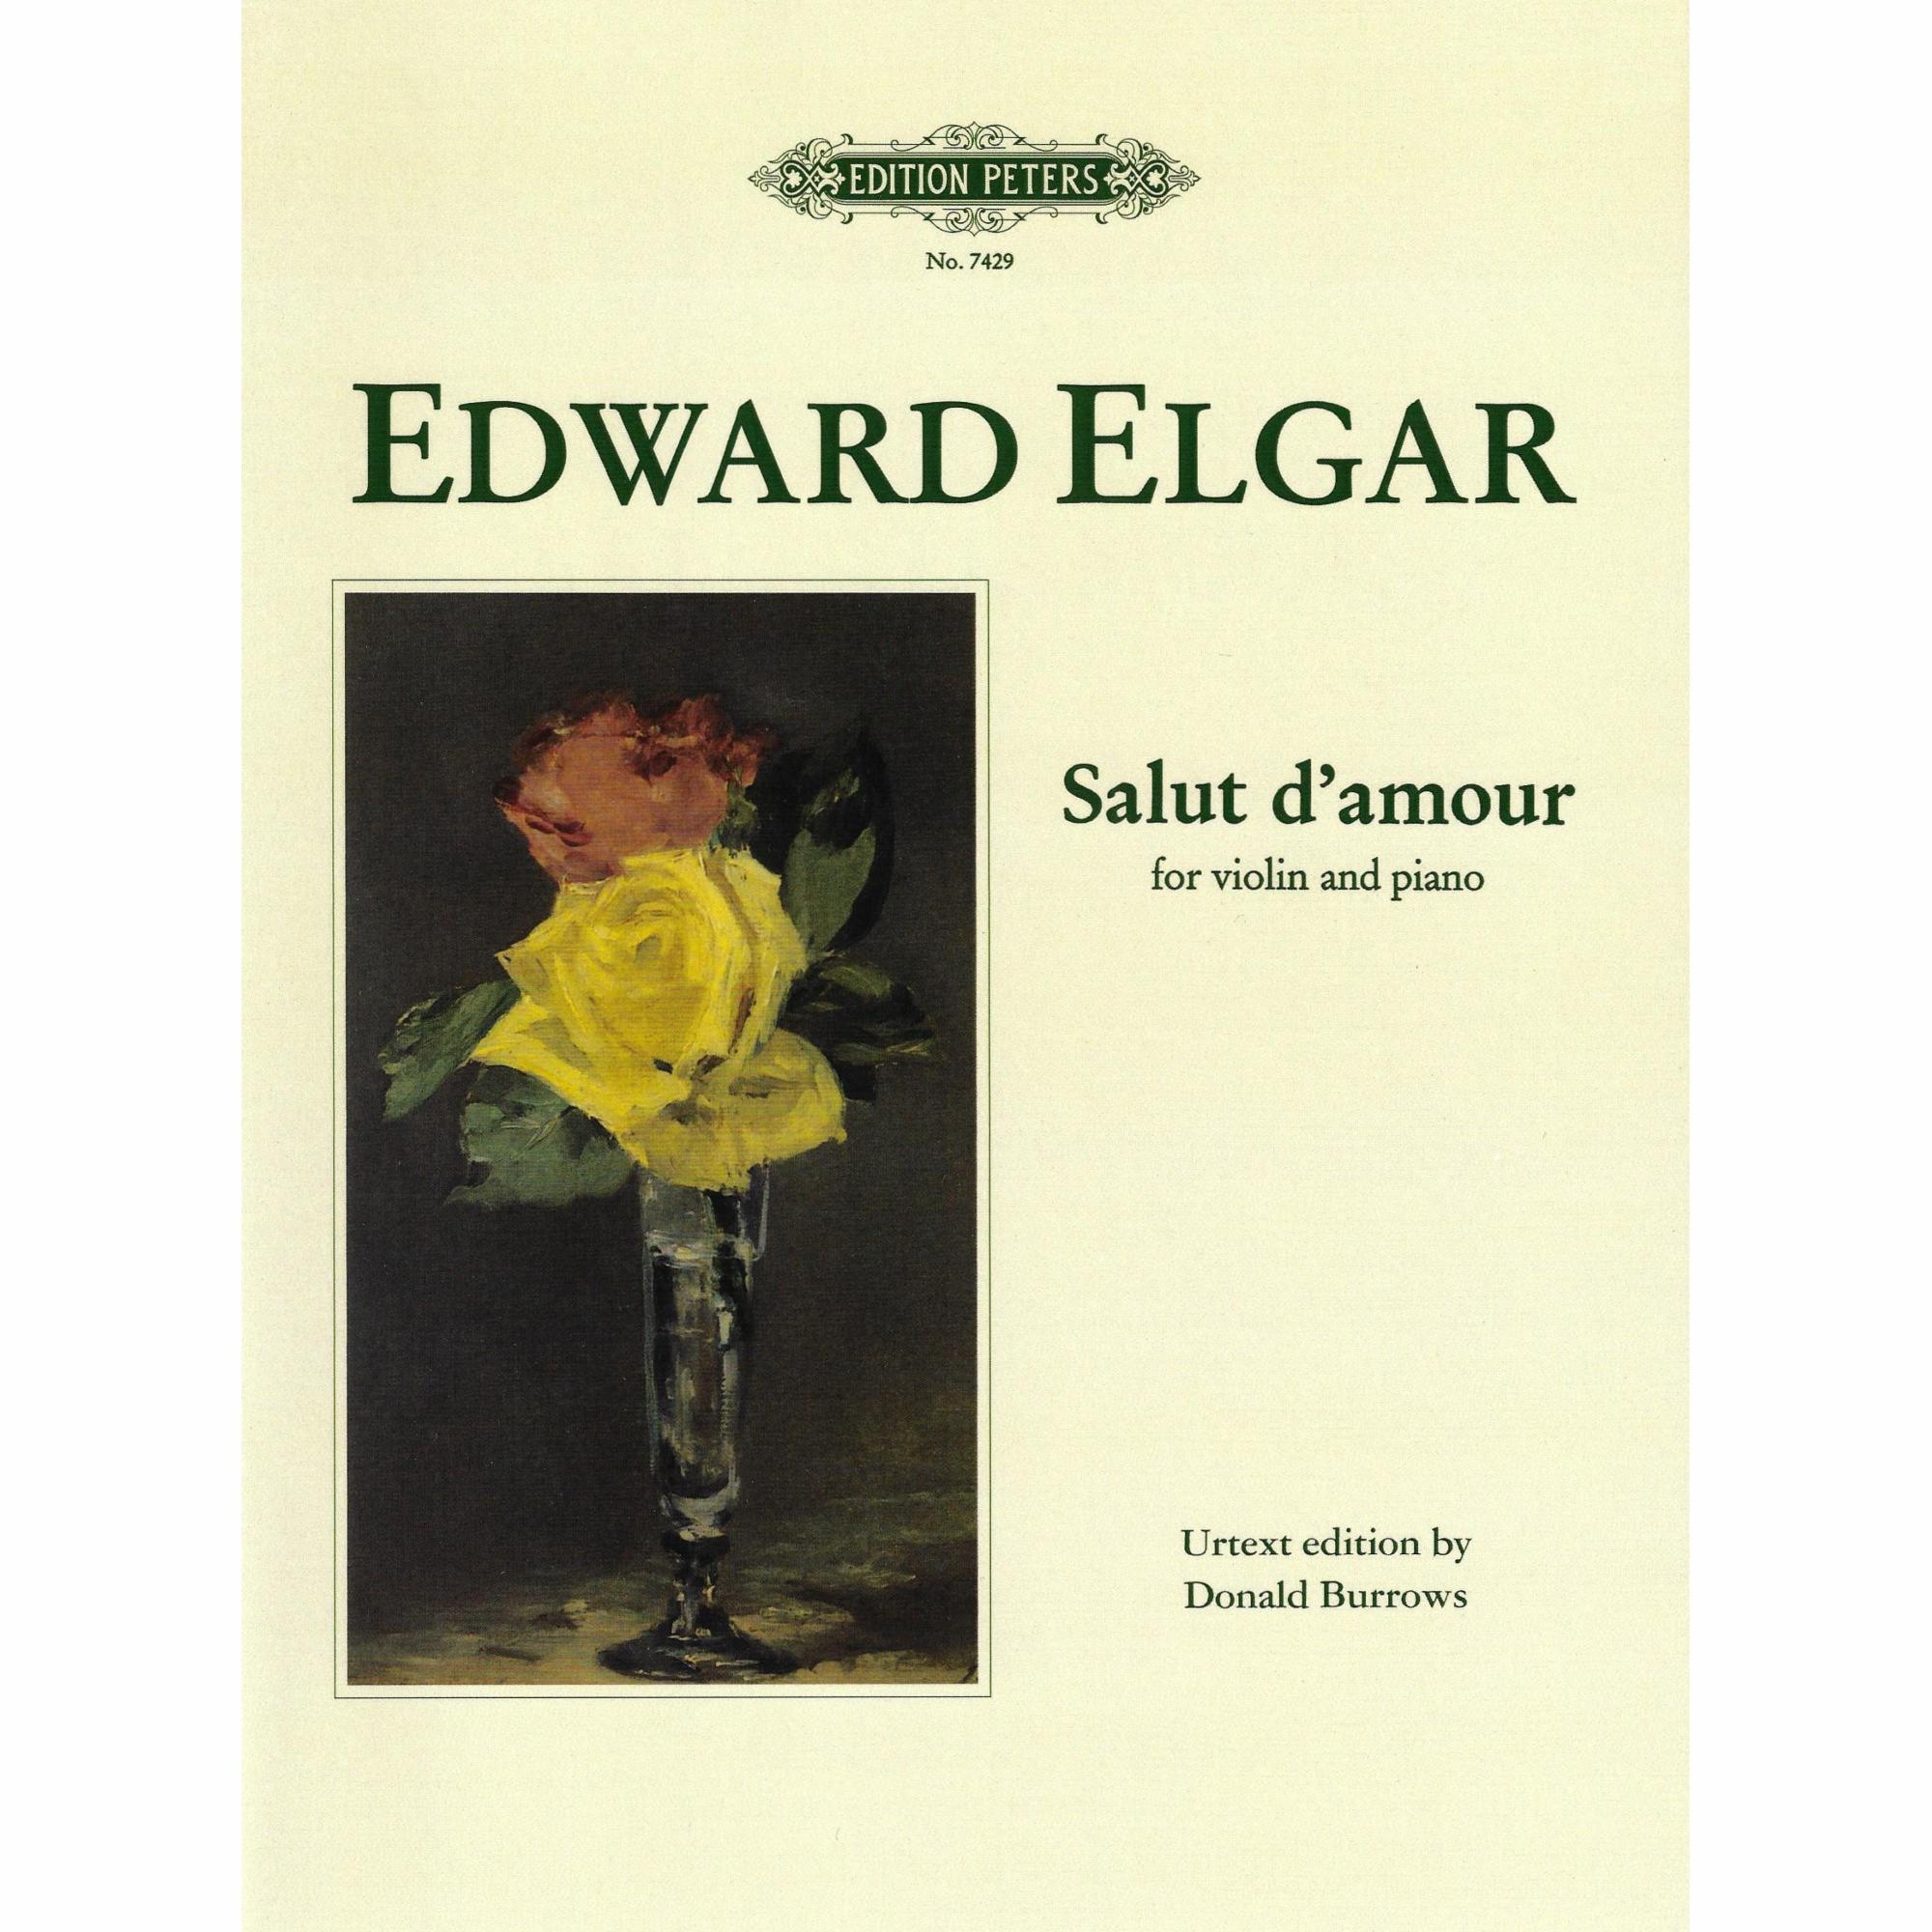 Elgar -- Salut d'amour, Op. 12 for Violin and Piano